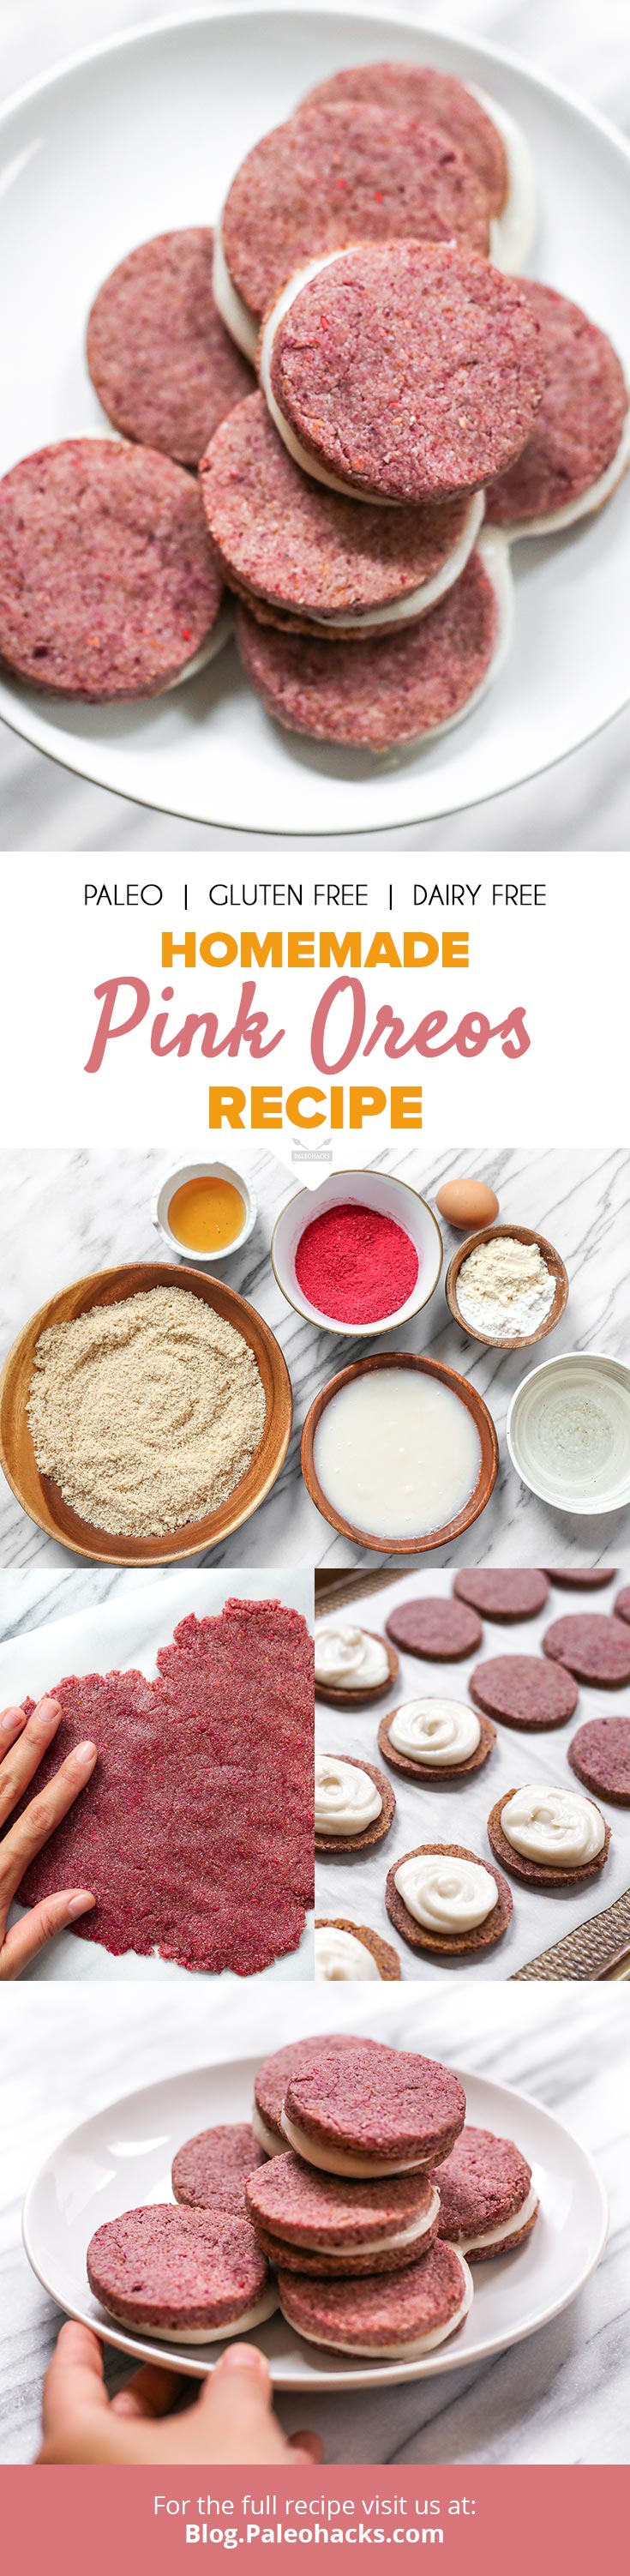 These naturally pink Paleo Oreos have a luscious coconut cream filling that’s completely dairy- and gluten-free.